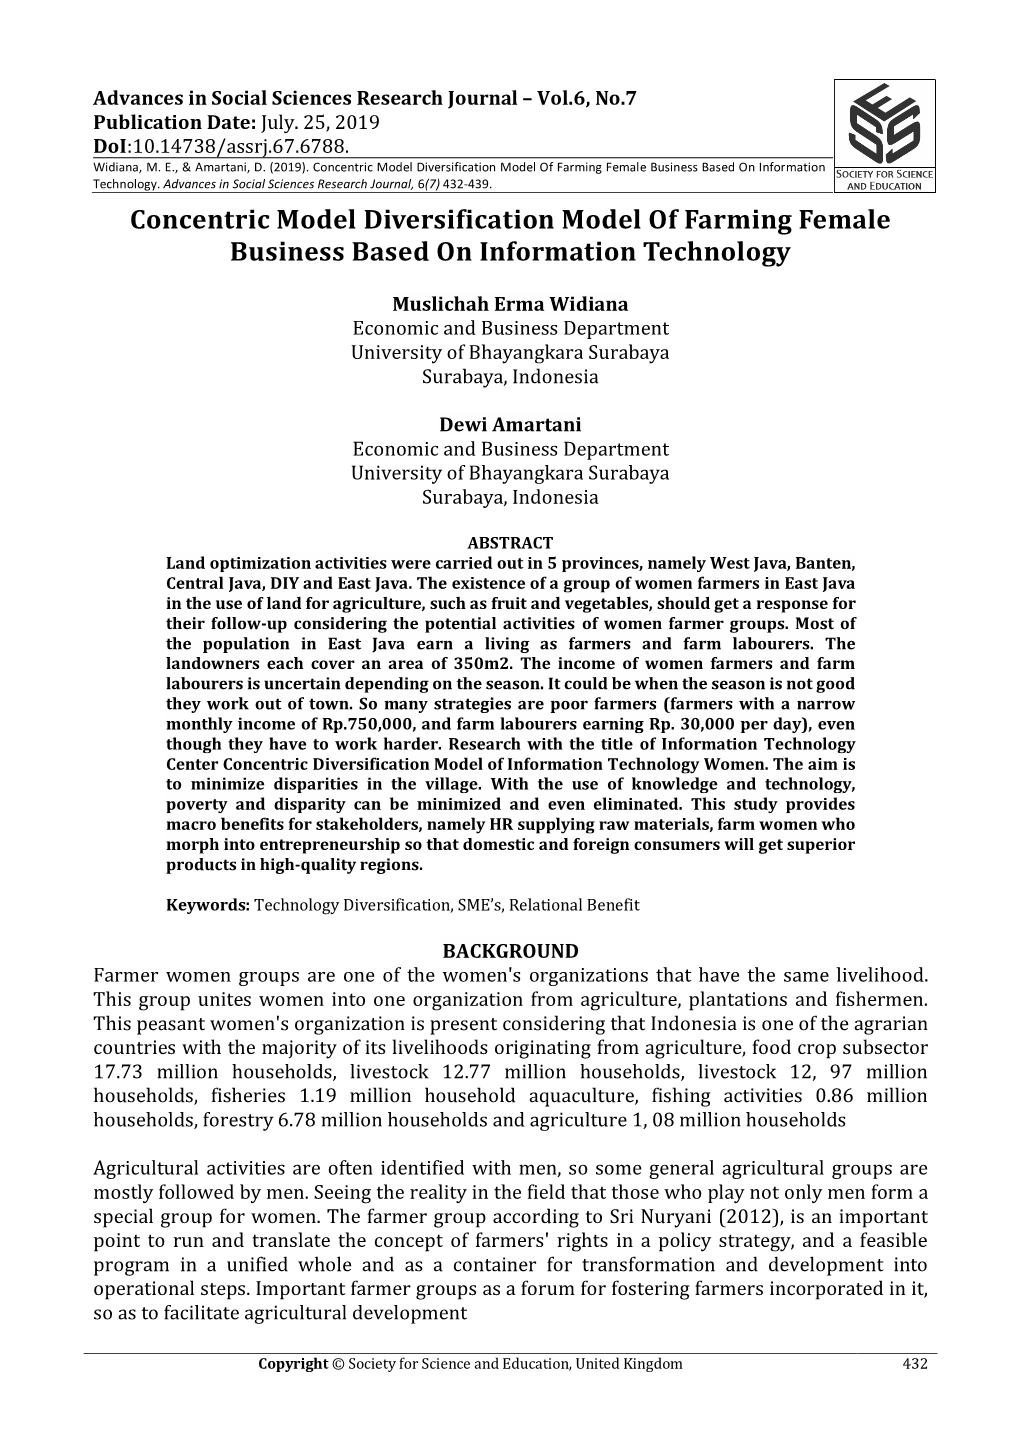 Concentric Model Diversification Model of Farming Female Business Based on Information Technology